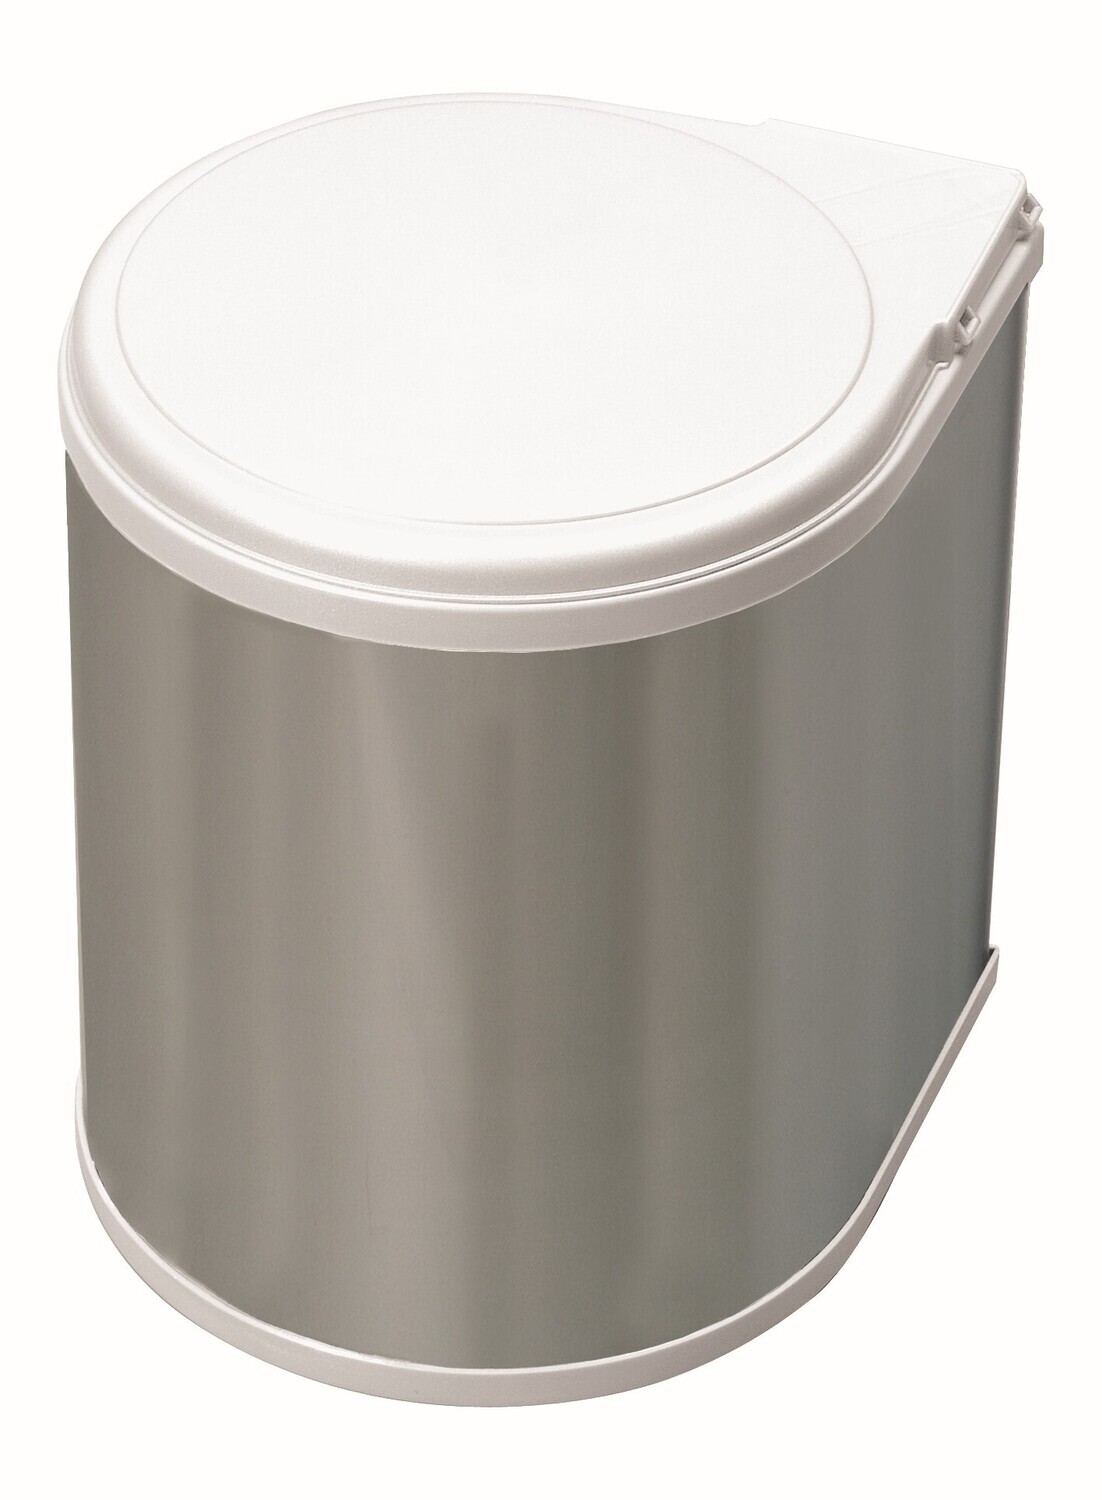 13 litre Stainless Steel Bin to Suit 400mm Cabinet.